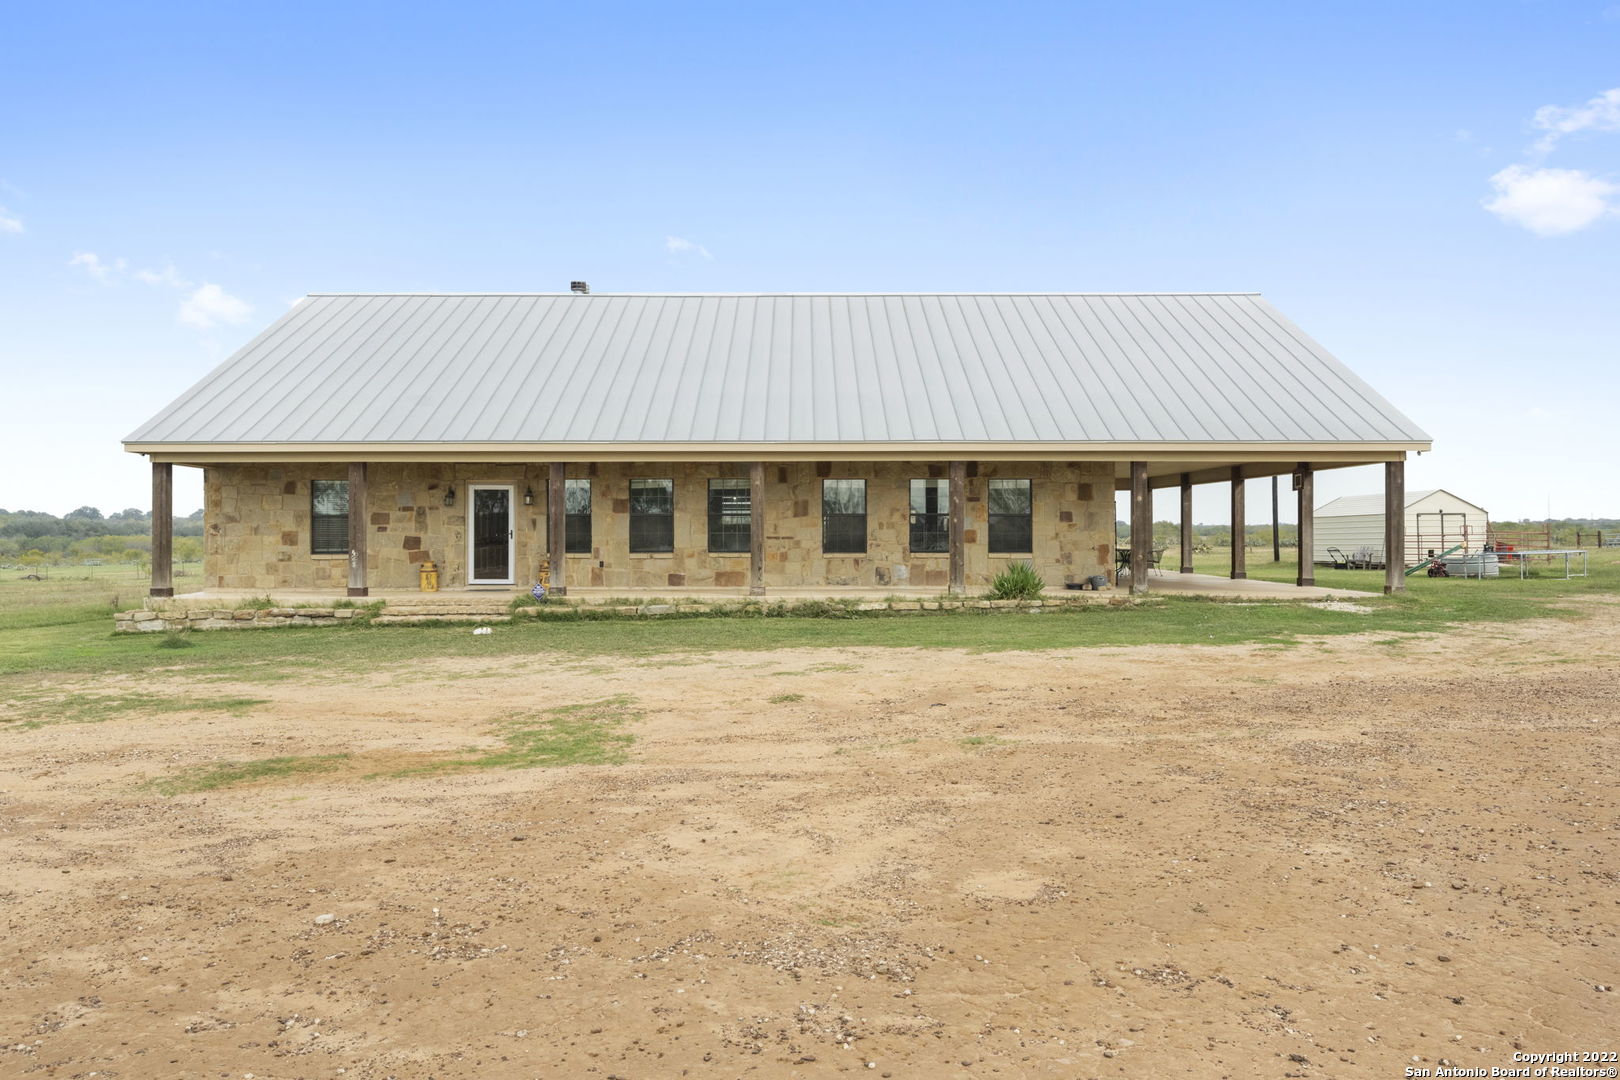 ATASCOSA COUNTY TAX# 0000900000004402.....SURVEY WITH EASEMENT ON ASSOCIATED DOCS....SO SECLUDED AND PRIVATE THIS HOME SITS OFF TANK HOLLOW ROAD DOWN IN THE BACK ON 3 ACS....ADDITIONAL 12 ACS CAN BE PURCHASED ALSO*****ROCK HOME WITH METAL ROOF*****LARGE FRONT COVERED PORCH THAT WRAPS AROUND TO THE SIDE FOR A LARGE COVERED PATIO AREA******OPEN FLOORPLAN WHEN YOU WALK IN FRONT DOOR YOU SEE HIGH CEILING WITH LARGE ISLAND KITCHEN, TONS OF CABINETS, BEAUTIFUL GRANITE.....DINING AREA INFRONT OF BEAUTIFUL ROCK FIREPLACE WITH INFLOOR PLUGS....THIS HOME HAS SO MANY OPTIONS.... 4 BEDROOM OR 5 BEDROOM...ONE OF THE BEDROOMS THAT HAS EXTERIOR DOOR CAN BE A PERFECT OFFICE OR STUDY**** 3 1/2 BATHS*****LARGE UTILTIY ROOM WITH EXTERIOR DOOR******SUNROOM OFF KITCHEN THRU FRENCH DOORS HAS BEAUTIFUL ROCK WOOD BURNING FIREPLACE****NICE SIZE BEDROOMS****MASTER BATH HAS LARGE GARDEN TUB WITH SHOWER *******GREAT WALKIN CLOSET**